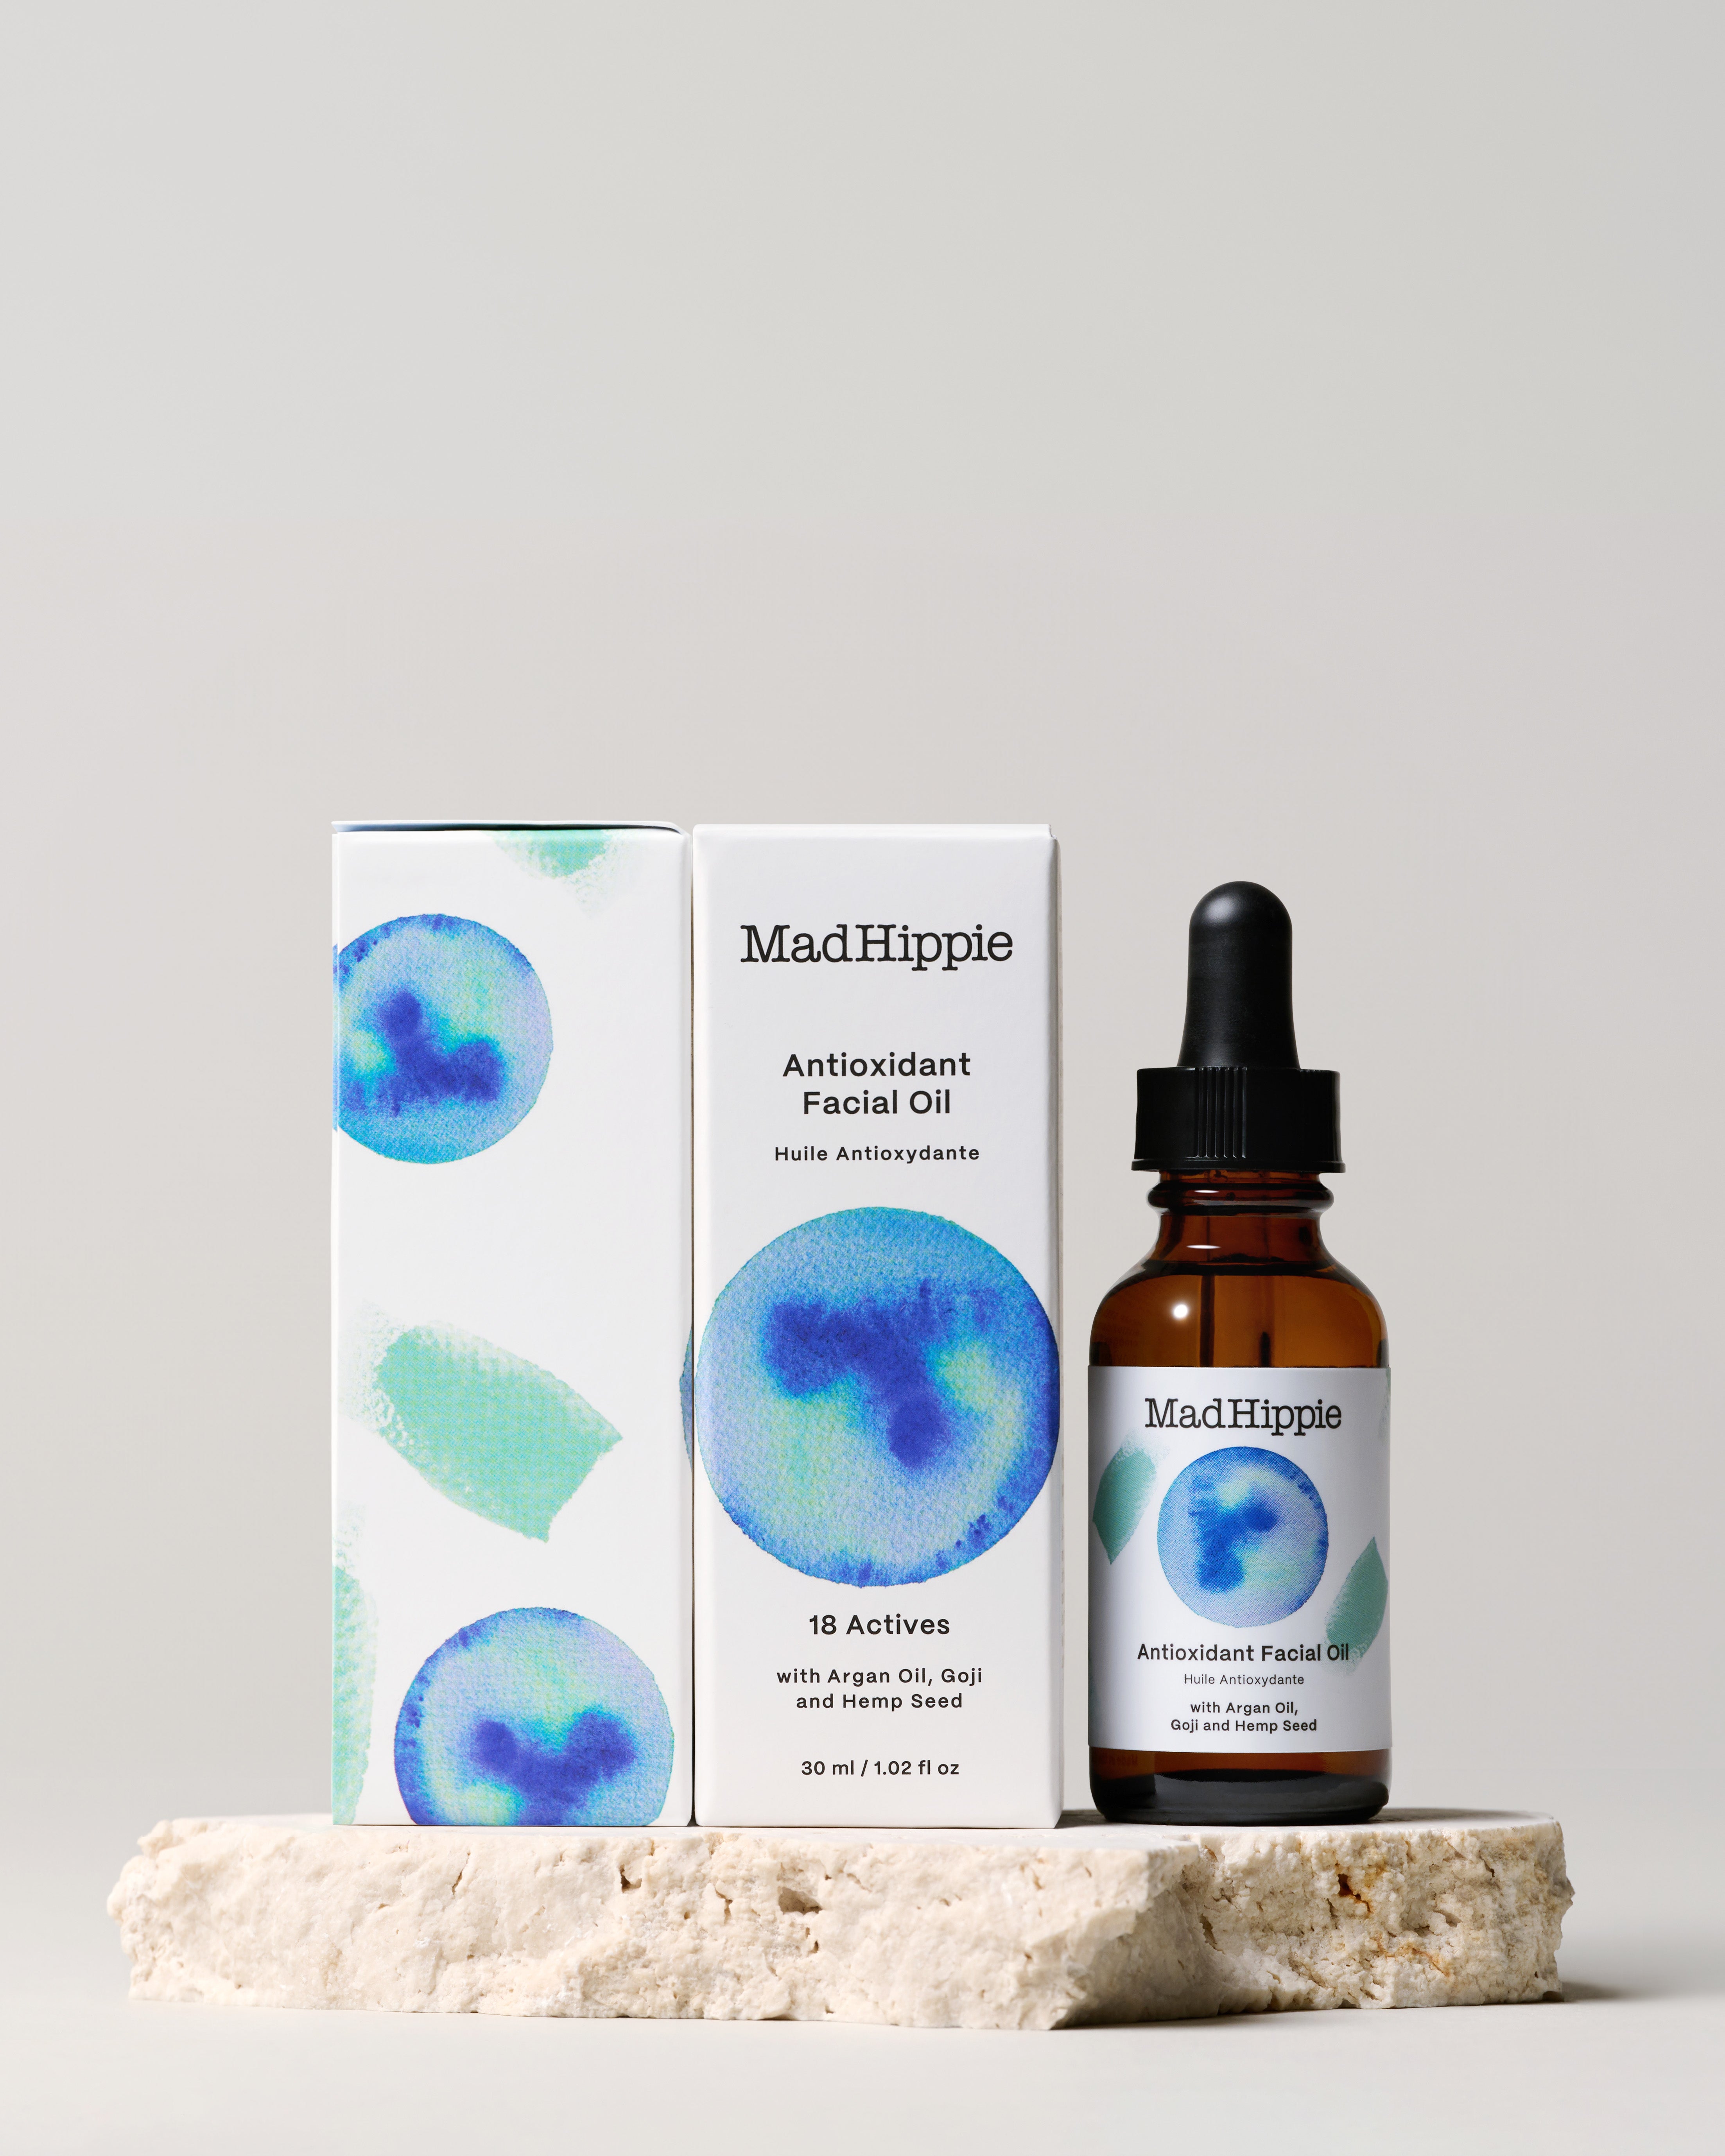 Antioxidant Facial Oil bottle + two boxes on stone slab, with gray background